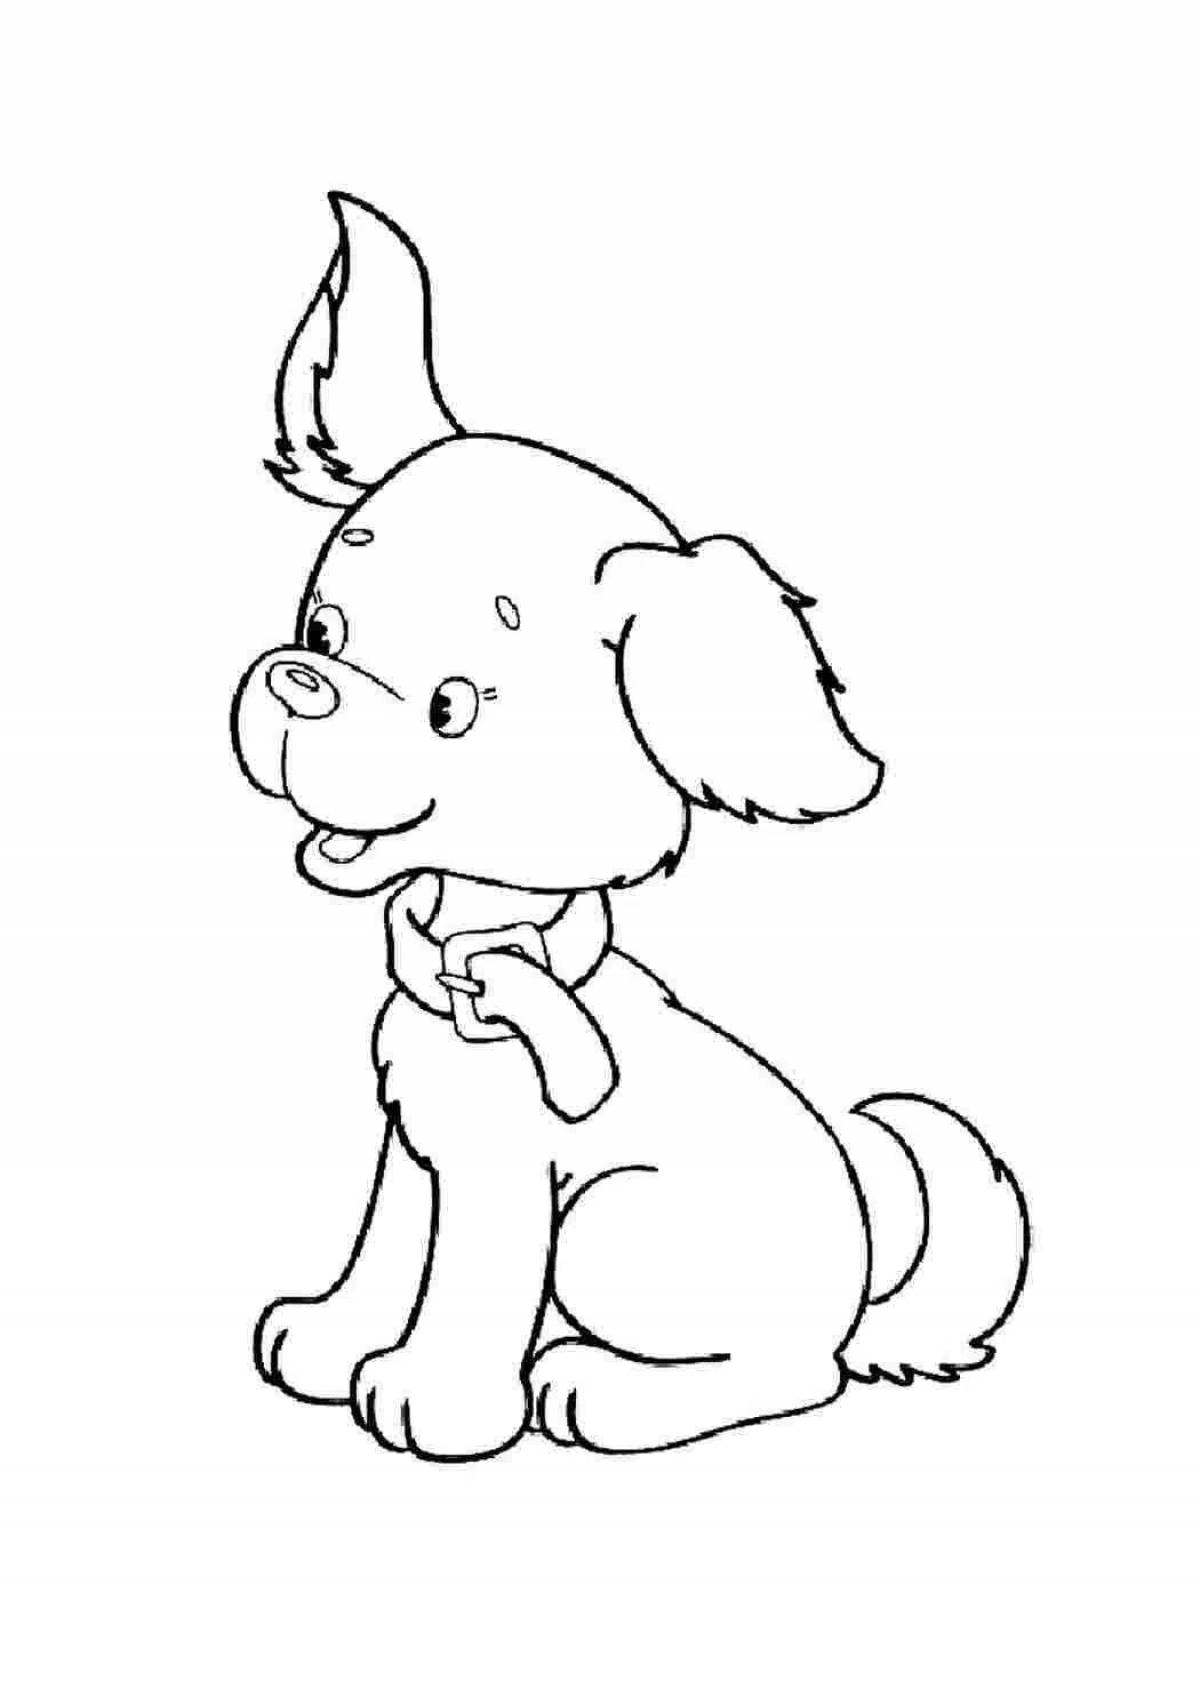 Coloring page running puppy